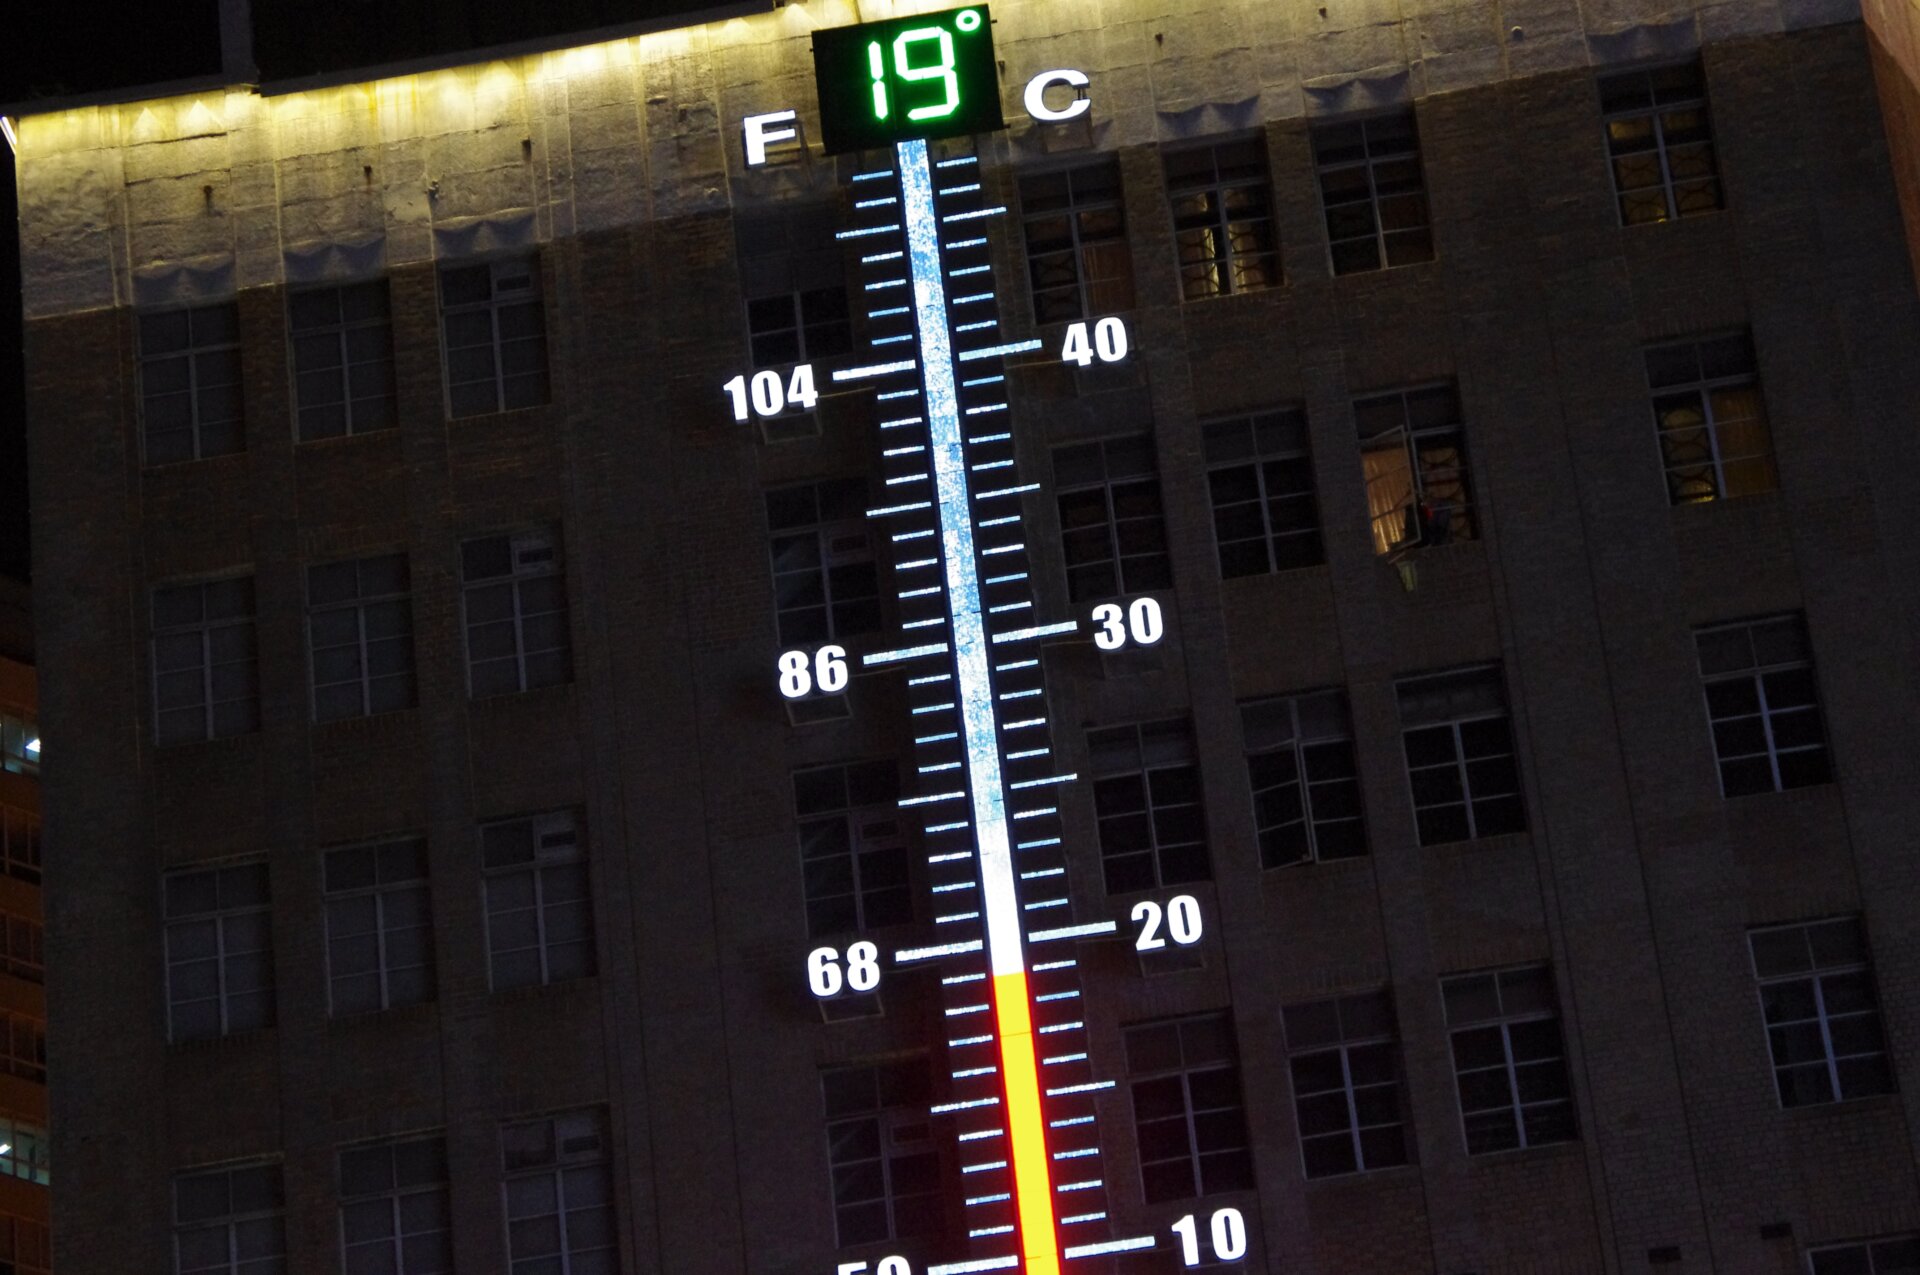 Giant thermometer